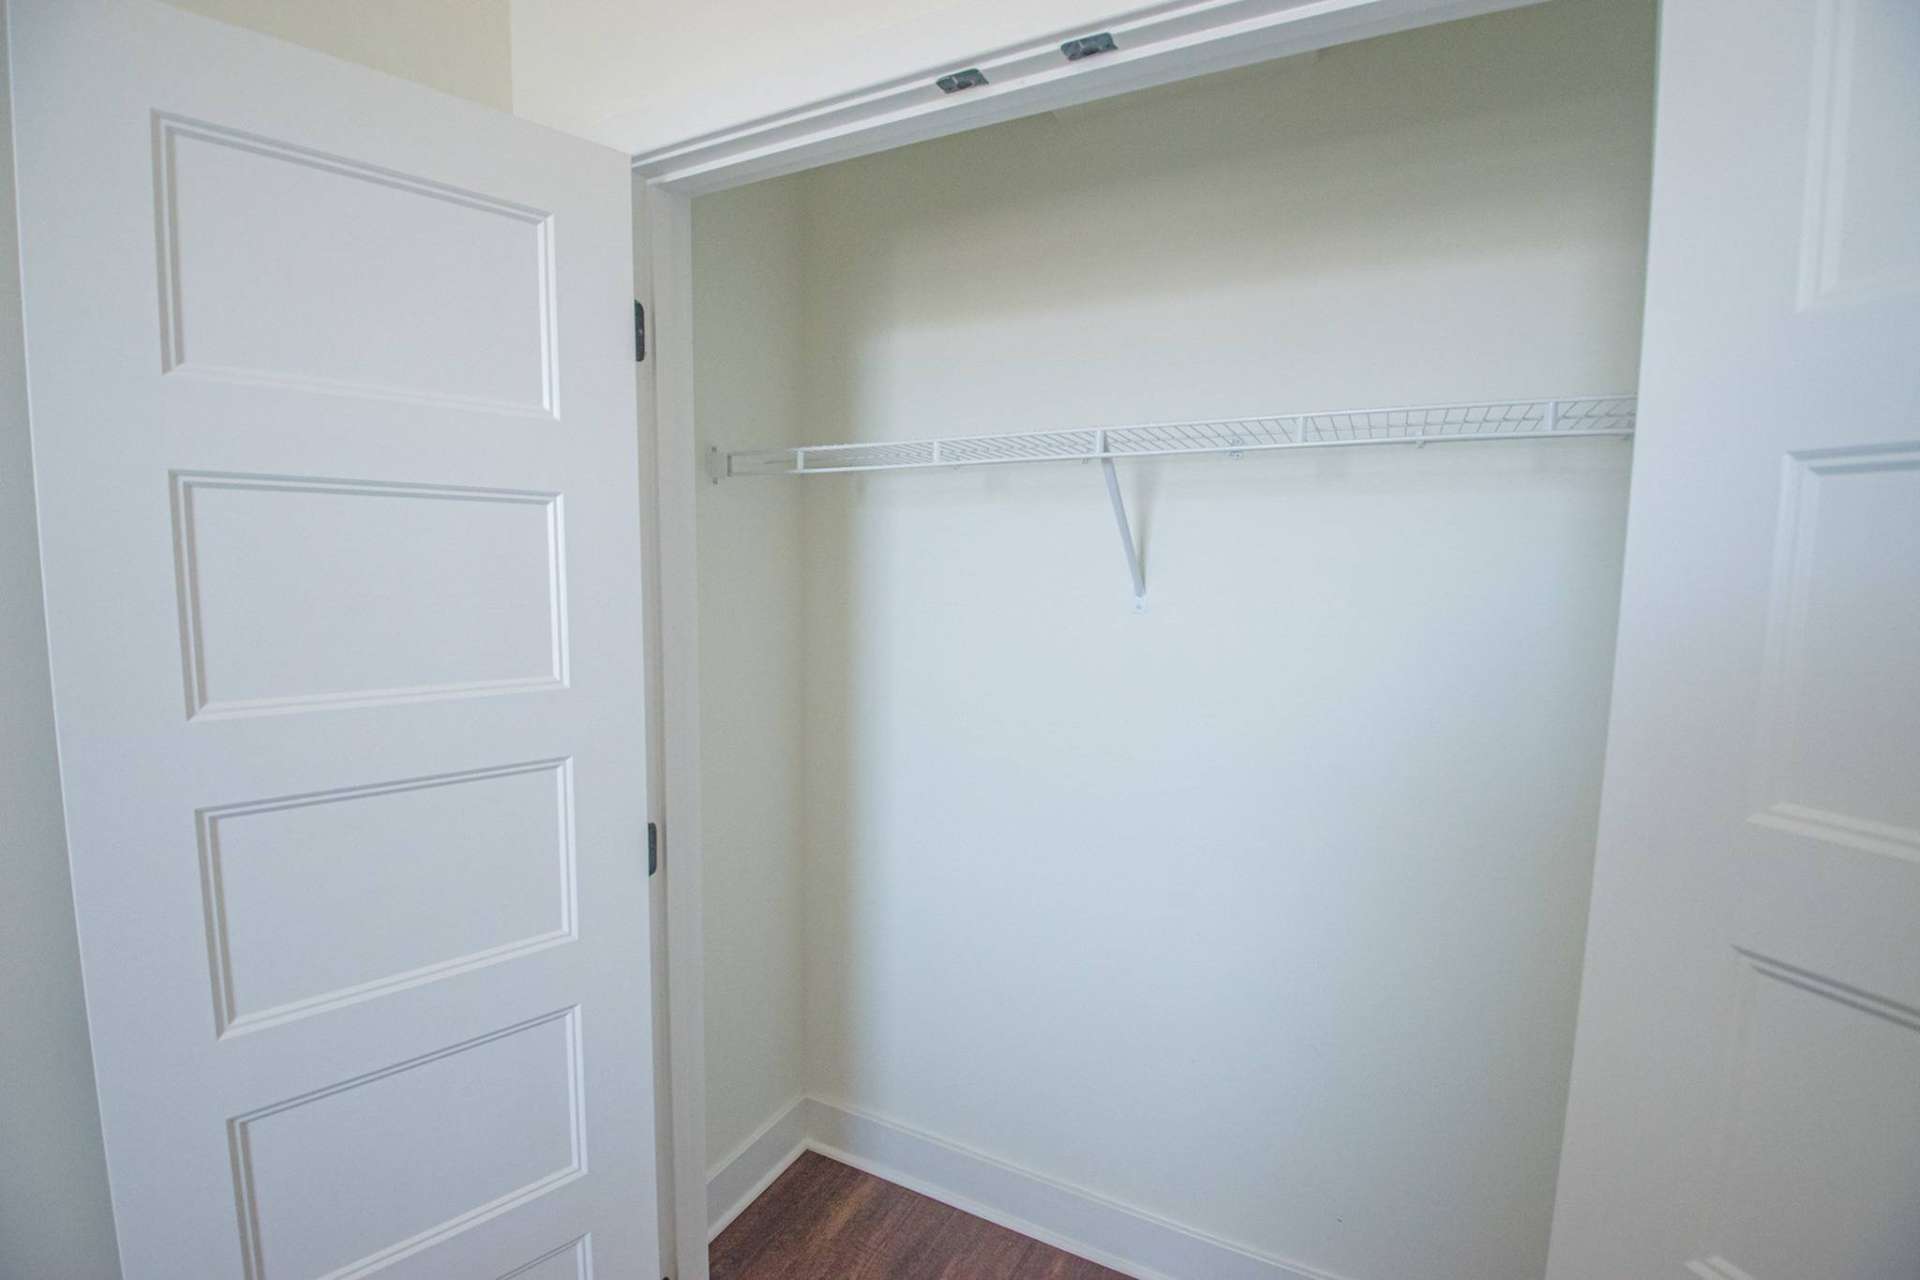 Closet with a shelf in an apartment at Magnolia Place Apartments.